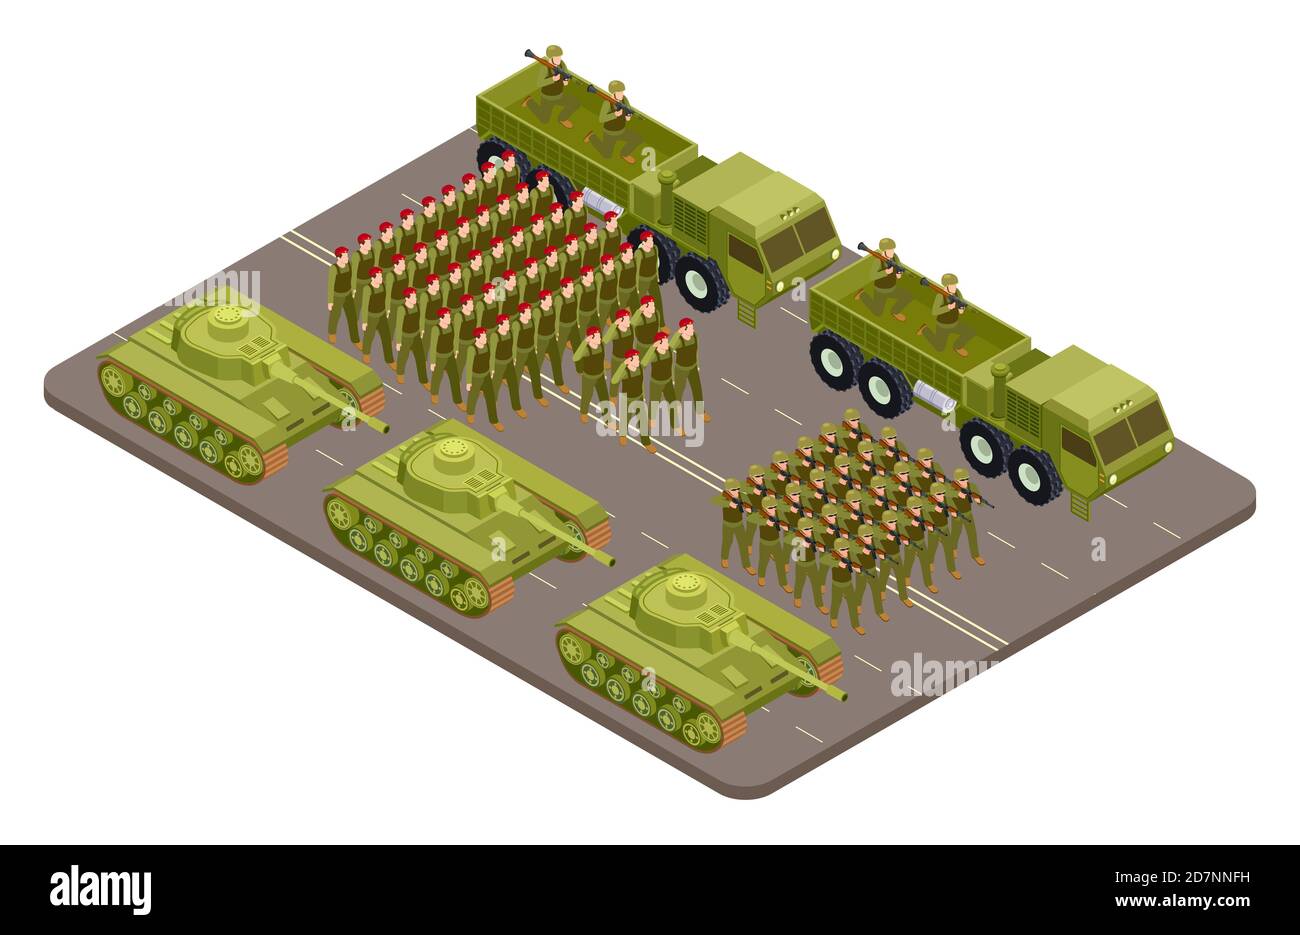 Military parade vector isometric with soldiers and military equipment. Military parade army, soldier uniform illustration Stock Vector